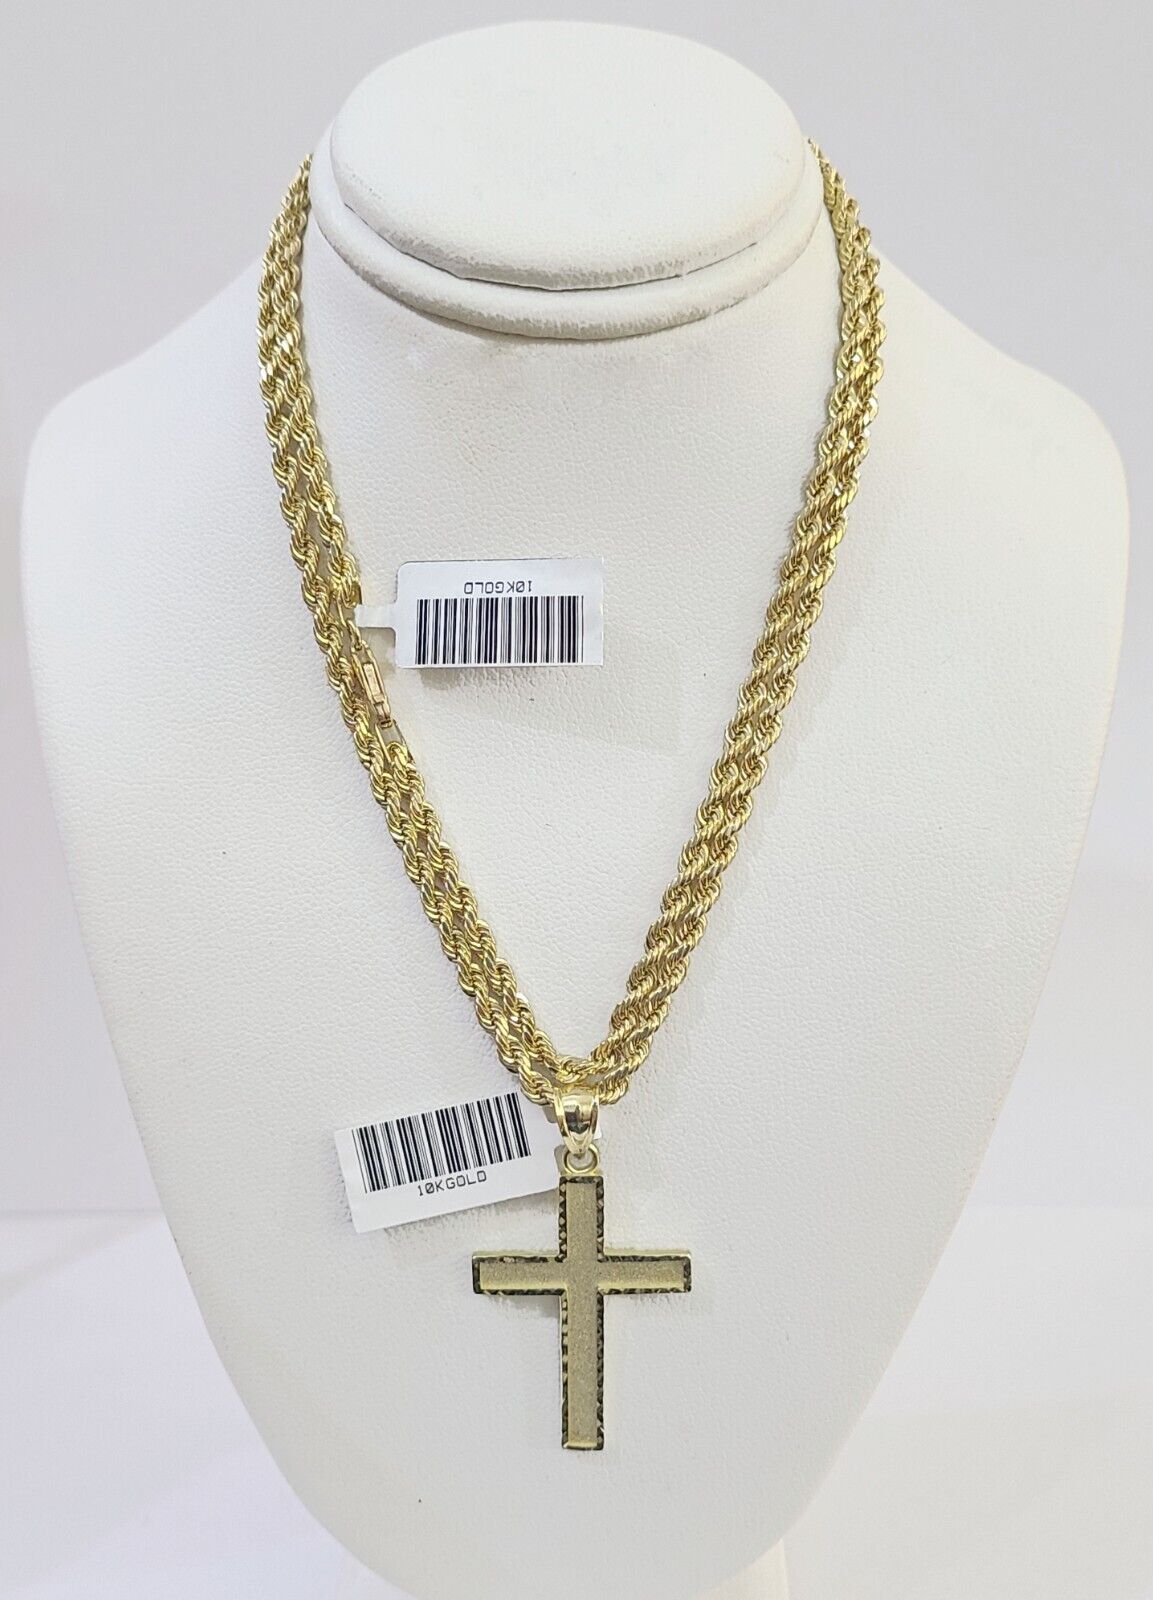 10k Gold Rope Chain & Cross Charm Pendent SET 3mm 22 Inches Necklace